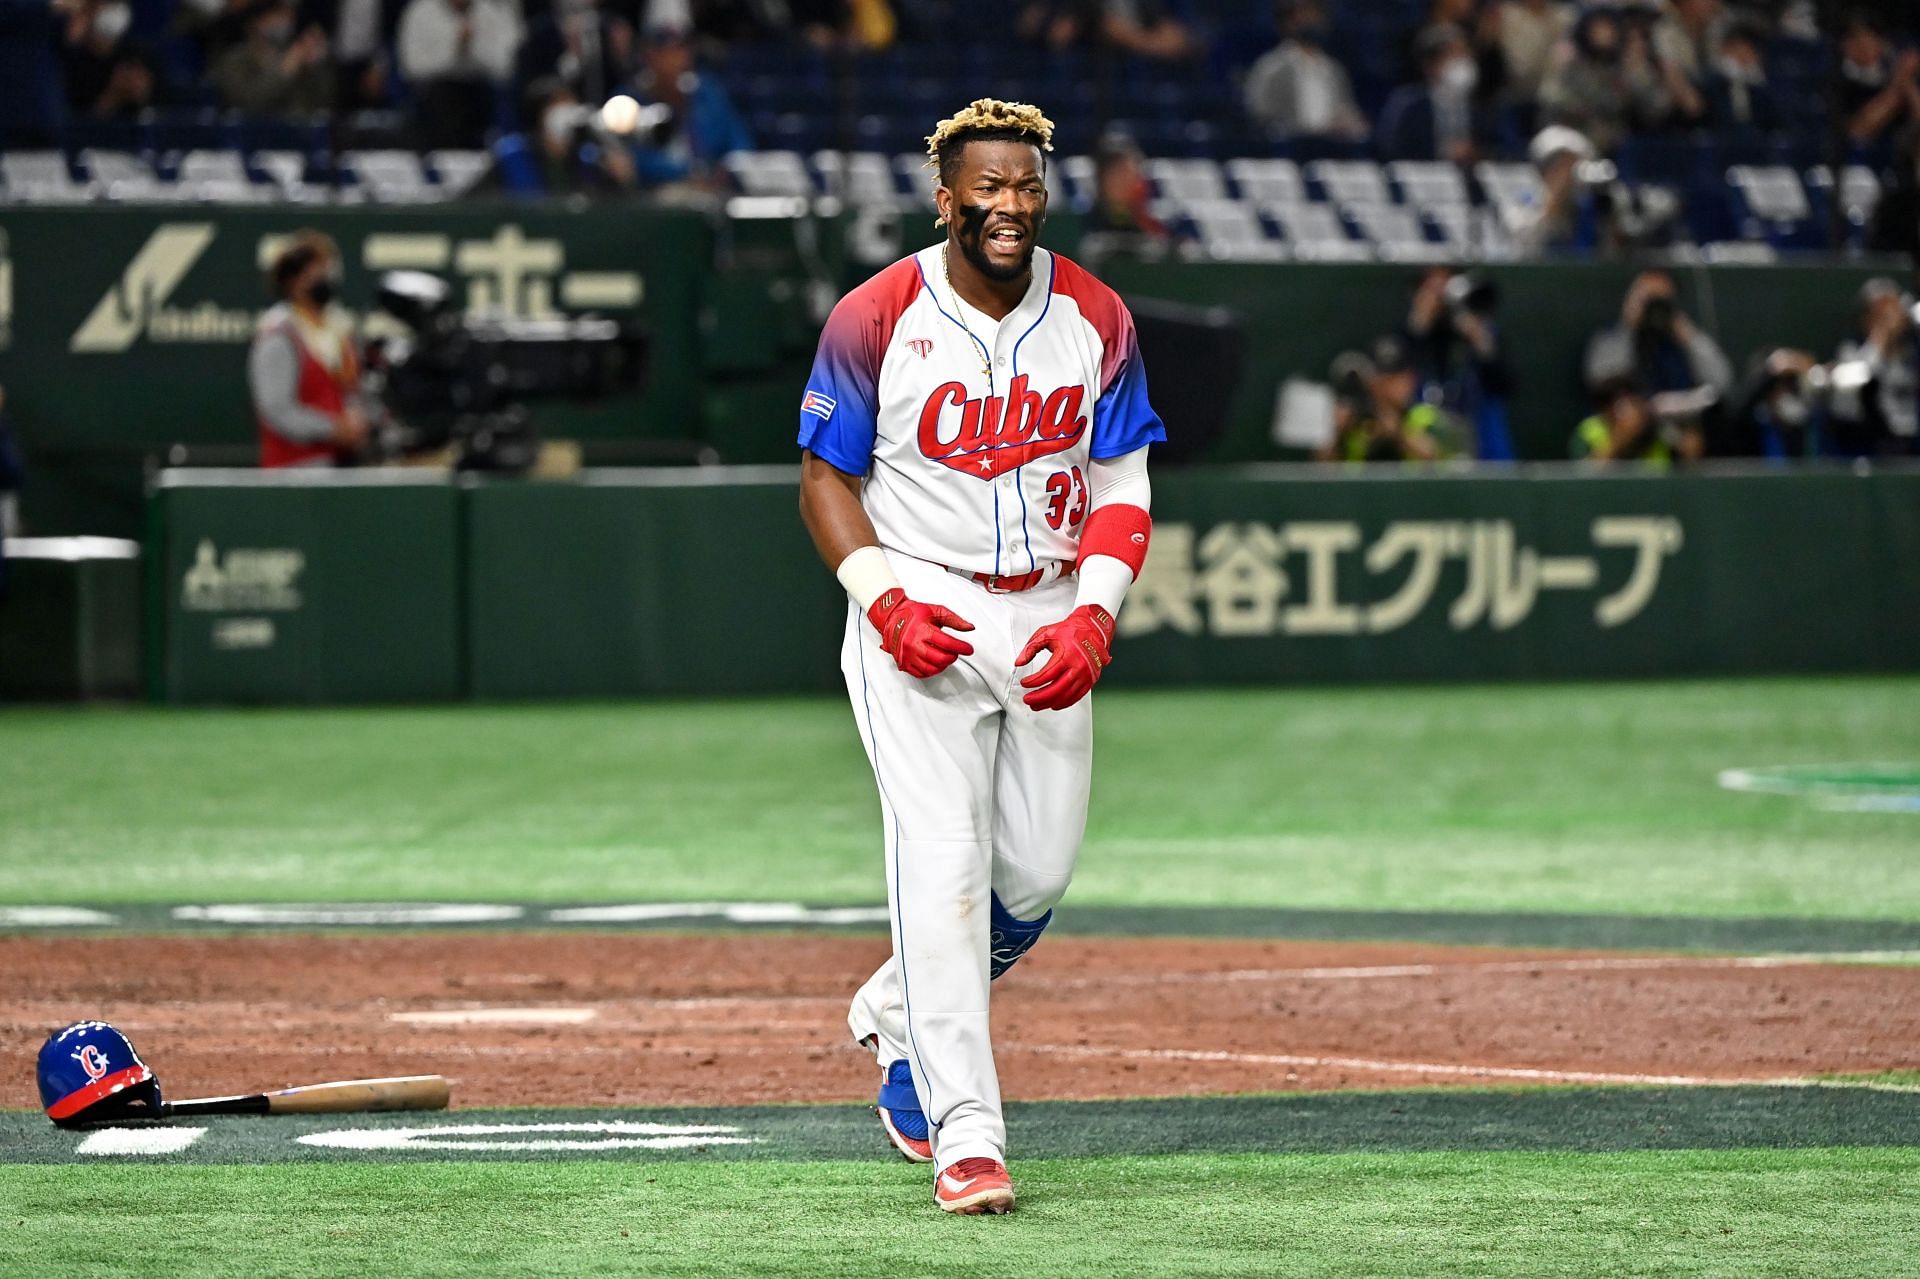 Israel knocked out of World Baseball Classic with 10-0 loss to Dominican  Republic